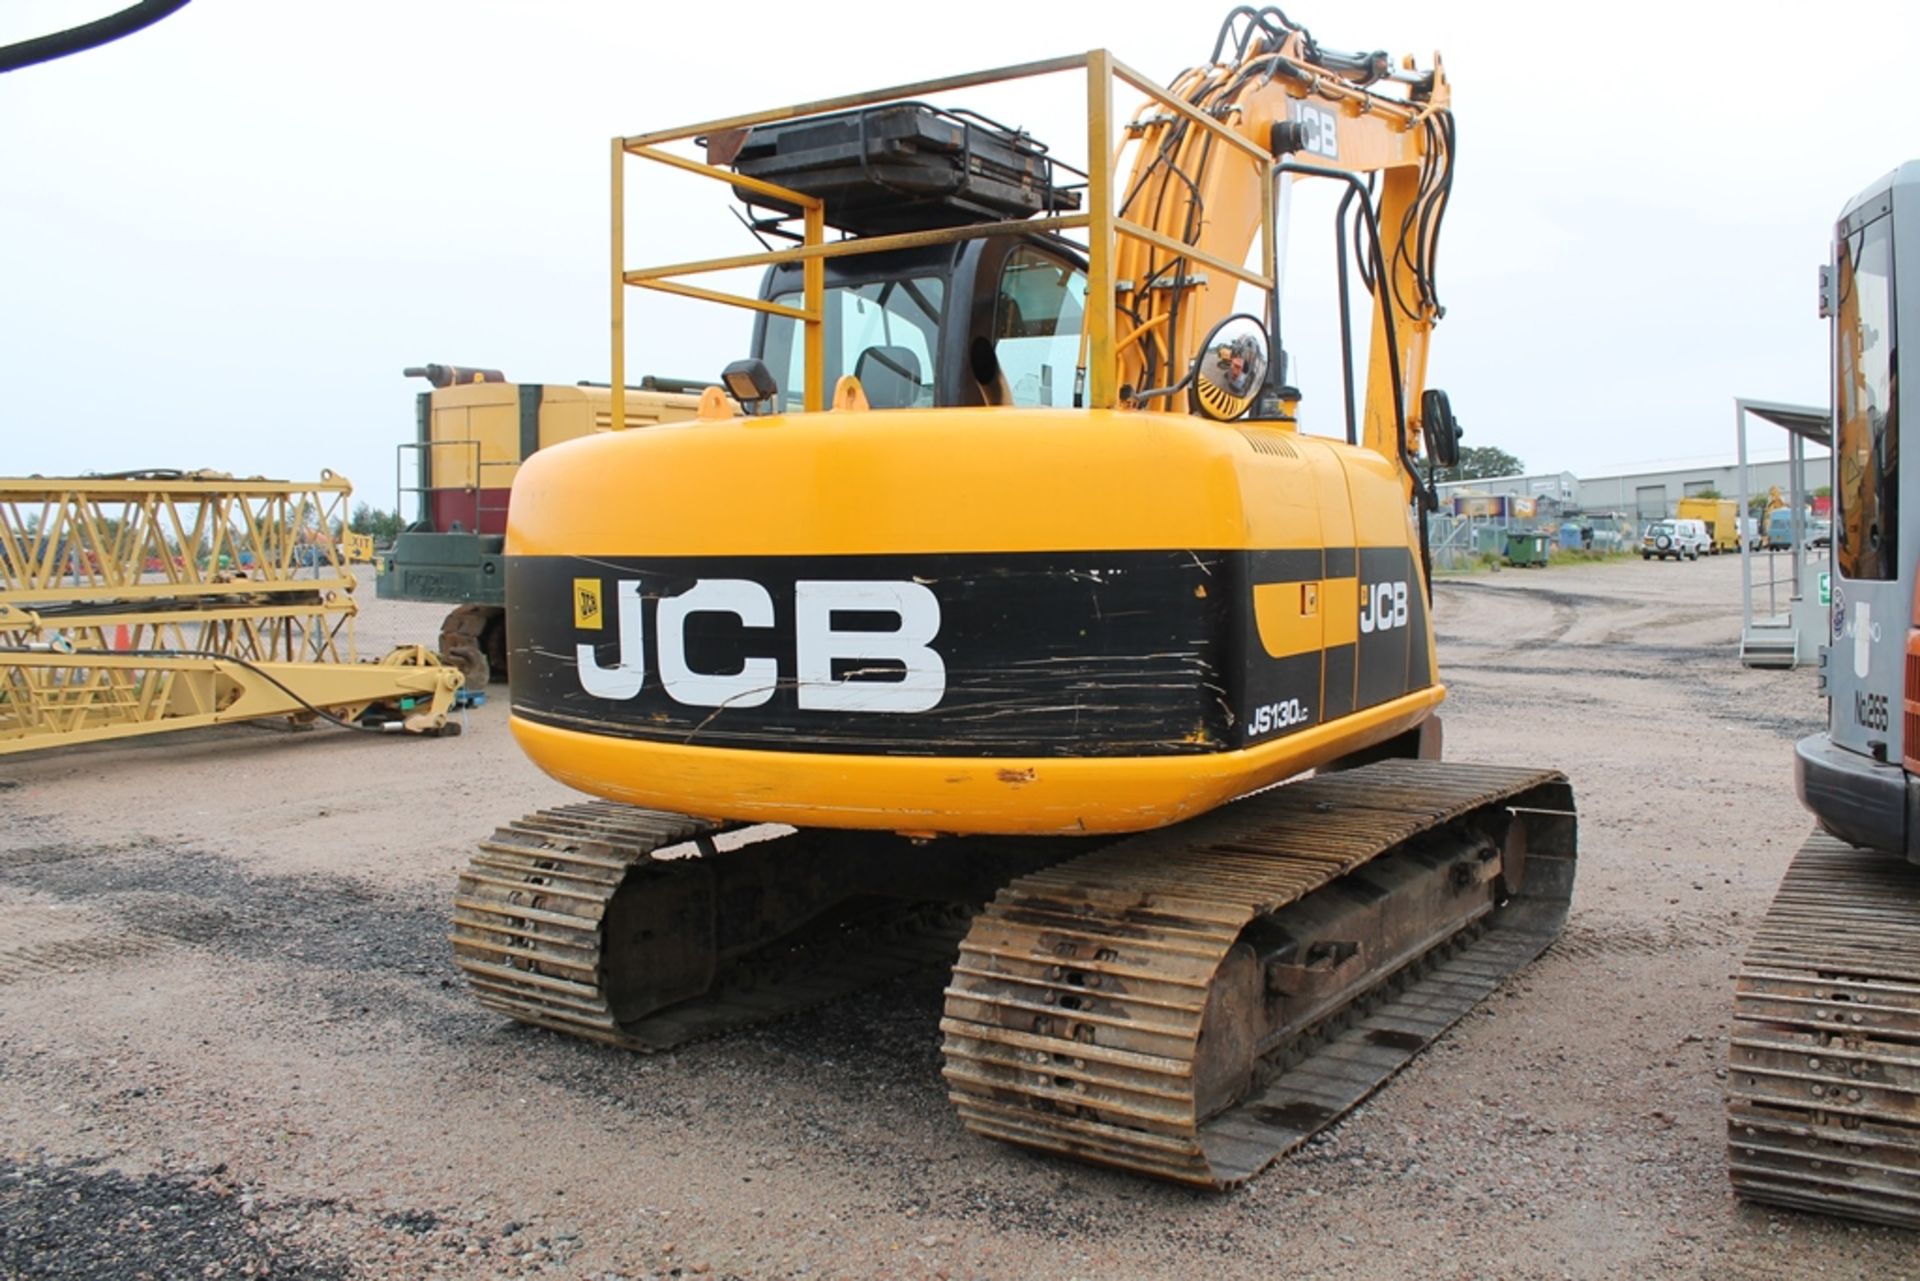 Jcb JS130 - 2999cc Tractor - Image 4 of 7